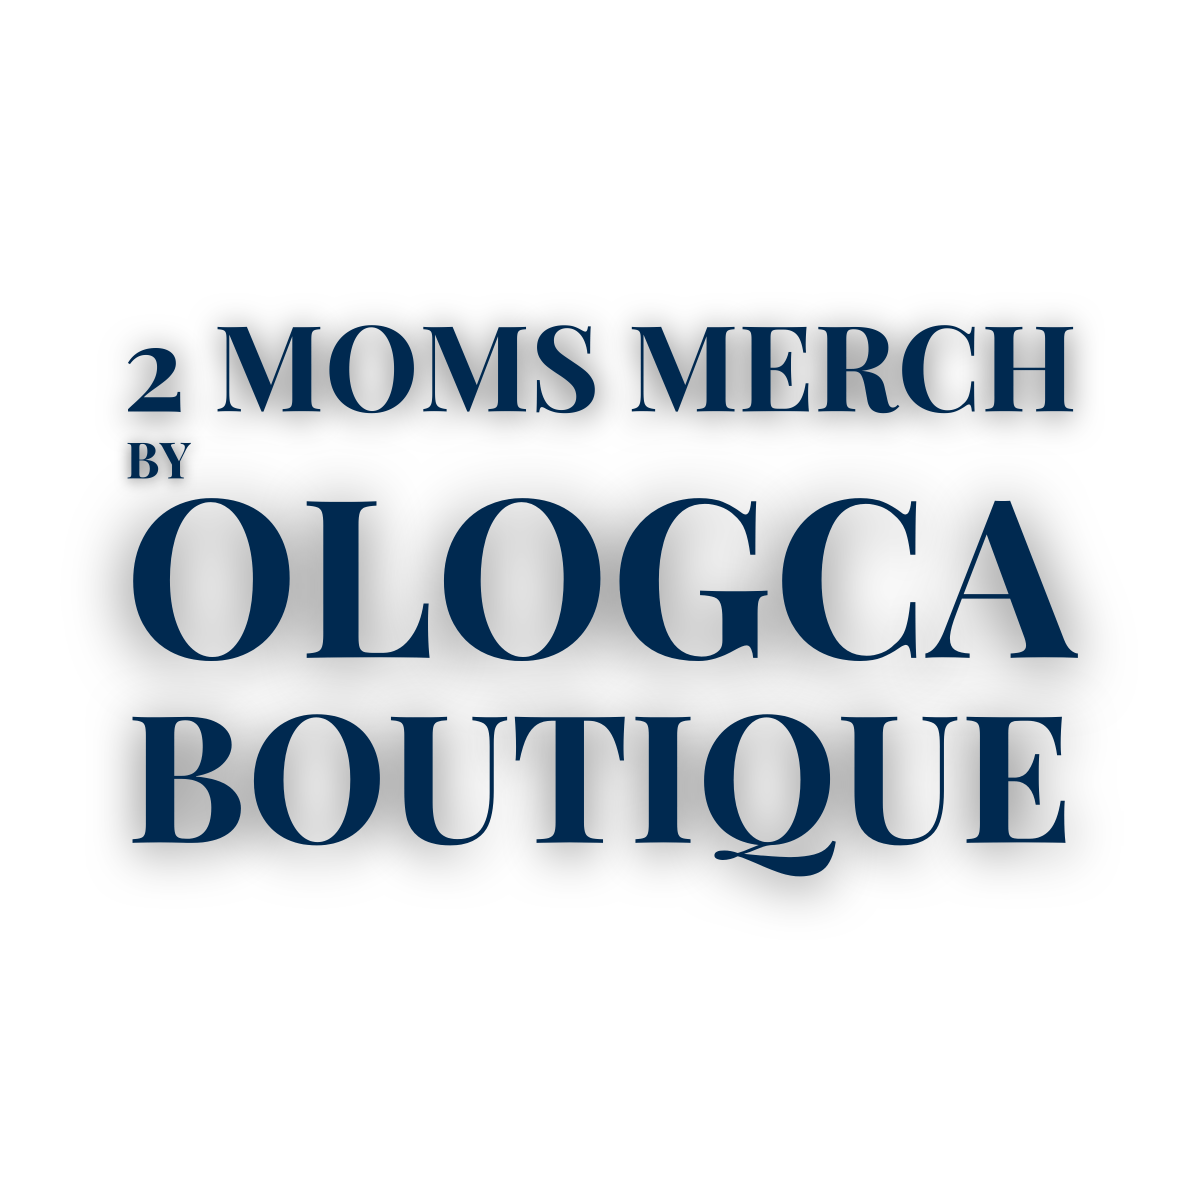 2 Moms Merch by Ologca Boutique - 2 Moms Craft Shack